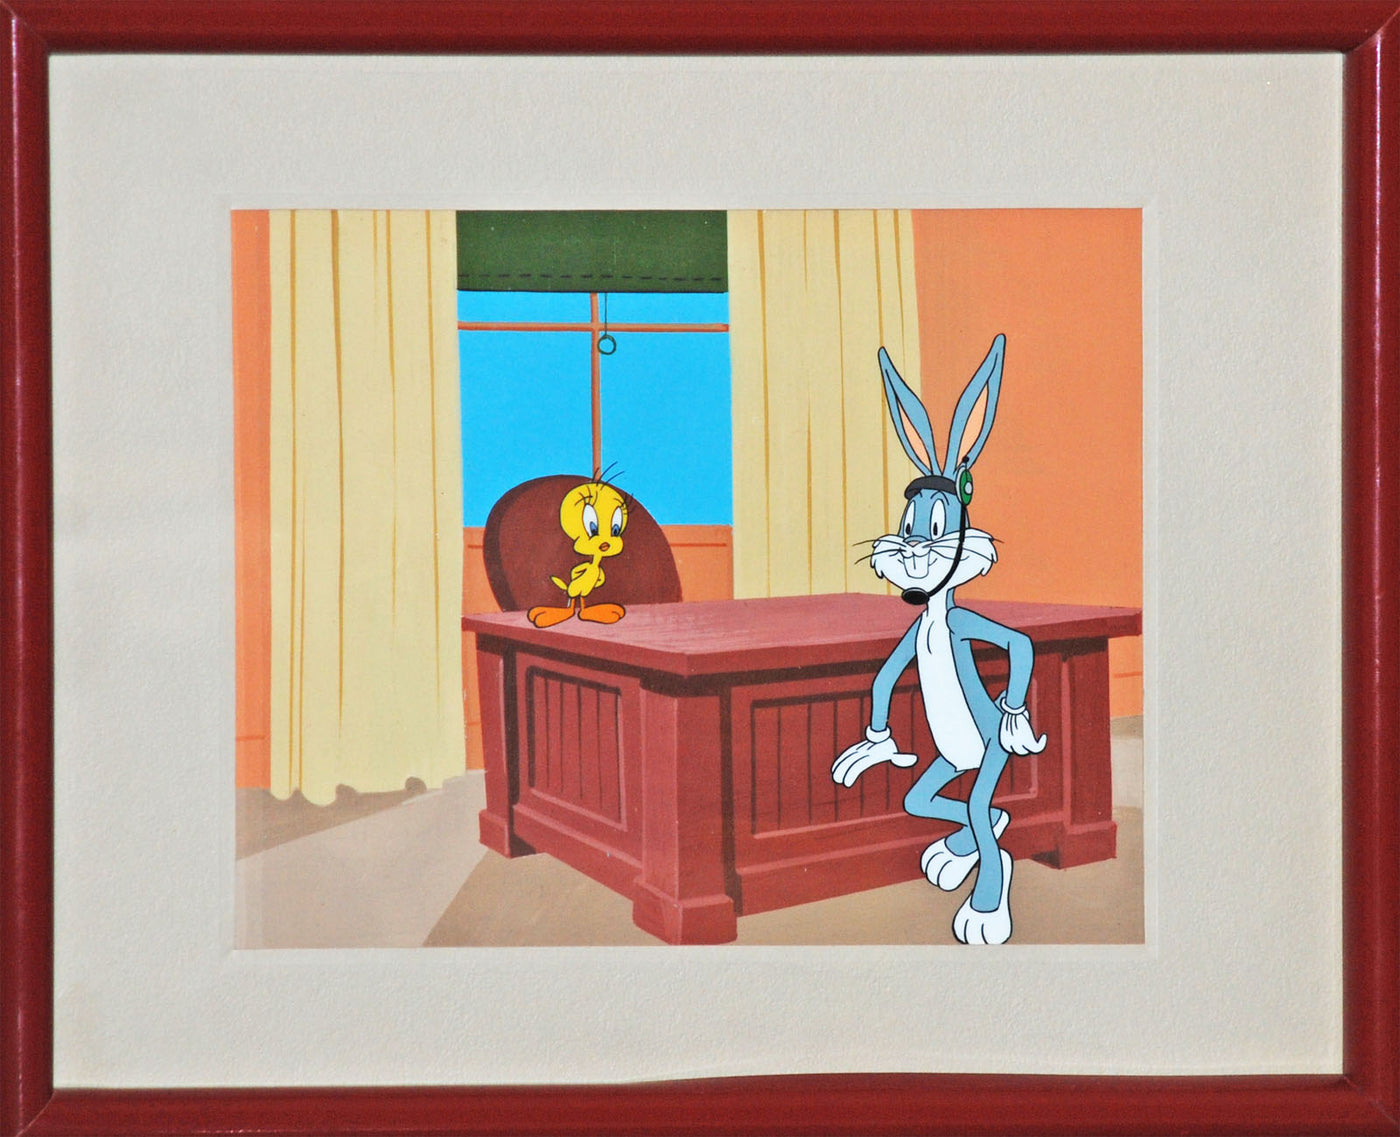 Original Warner Brothers Production Cel from Ounce of Prevention (1983) featuring Bugs Bunny & Tweety